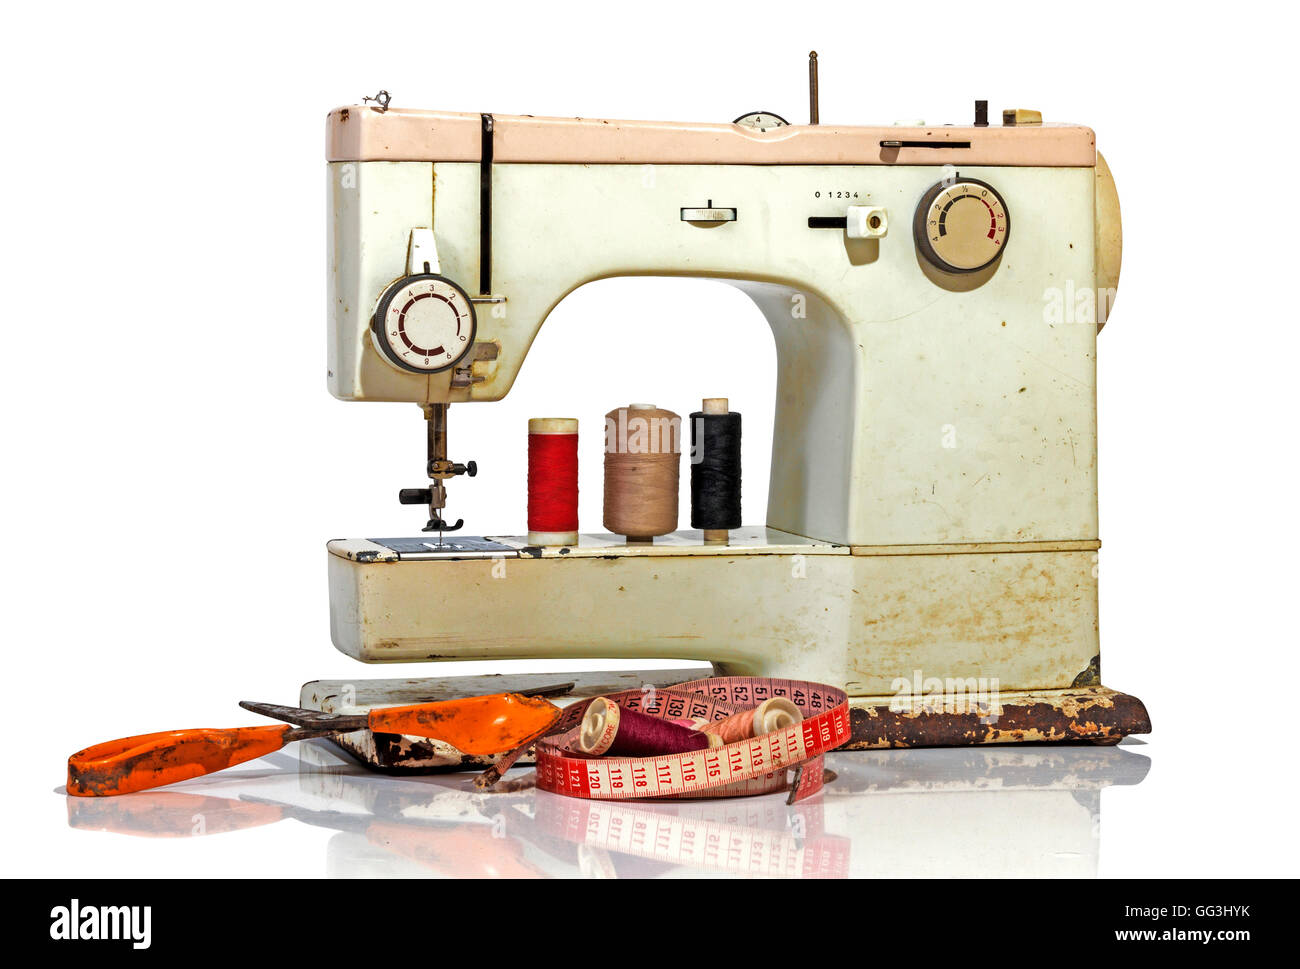 https://c8.alamy.com/comp/GG3HYK/old-rusty-vintage-sewing-machine-with-colored-cotton-reels-scissors-GG3HYK.jpg